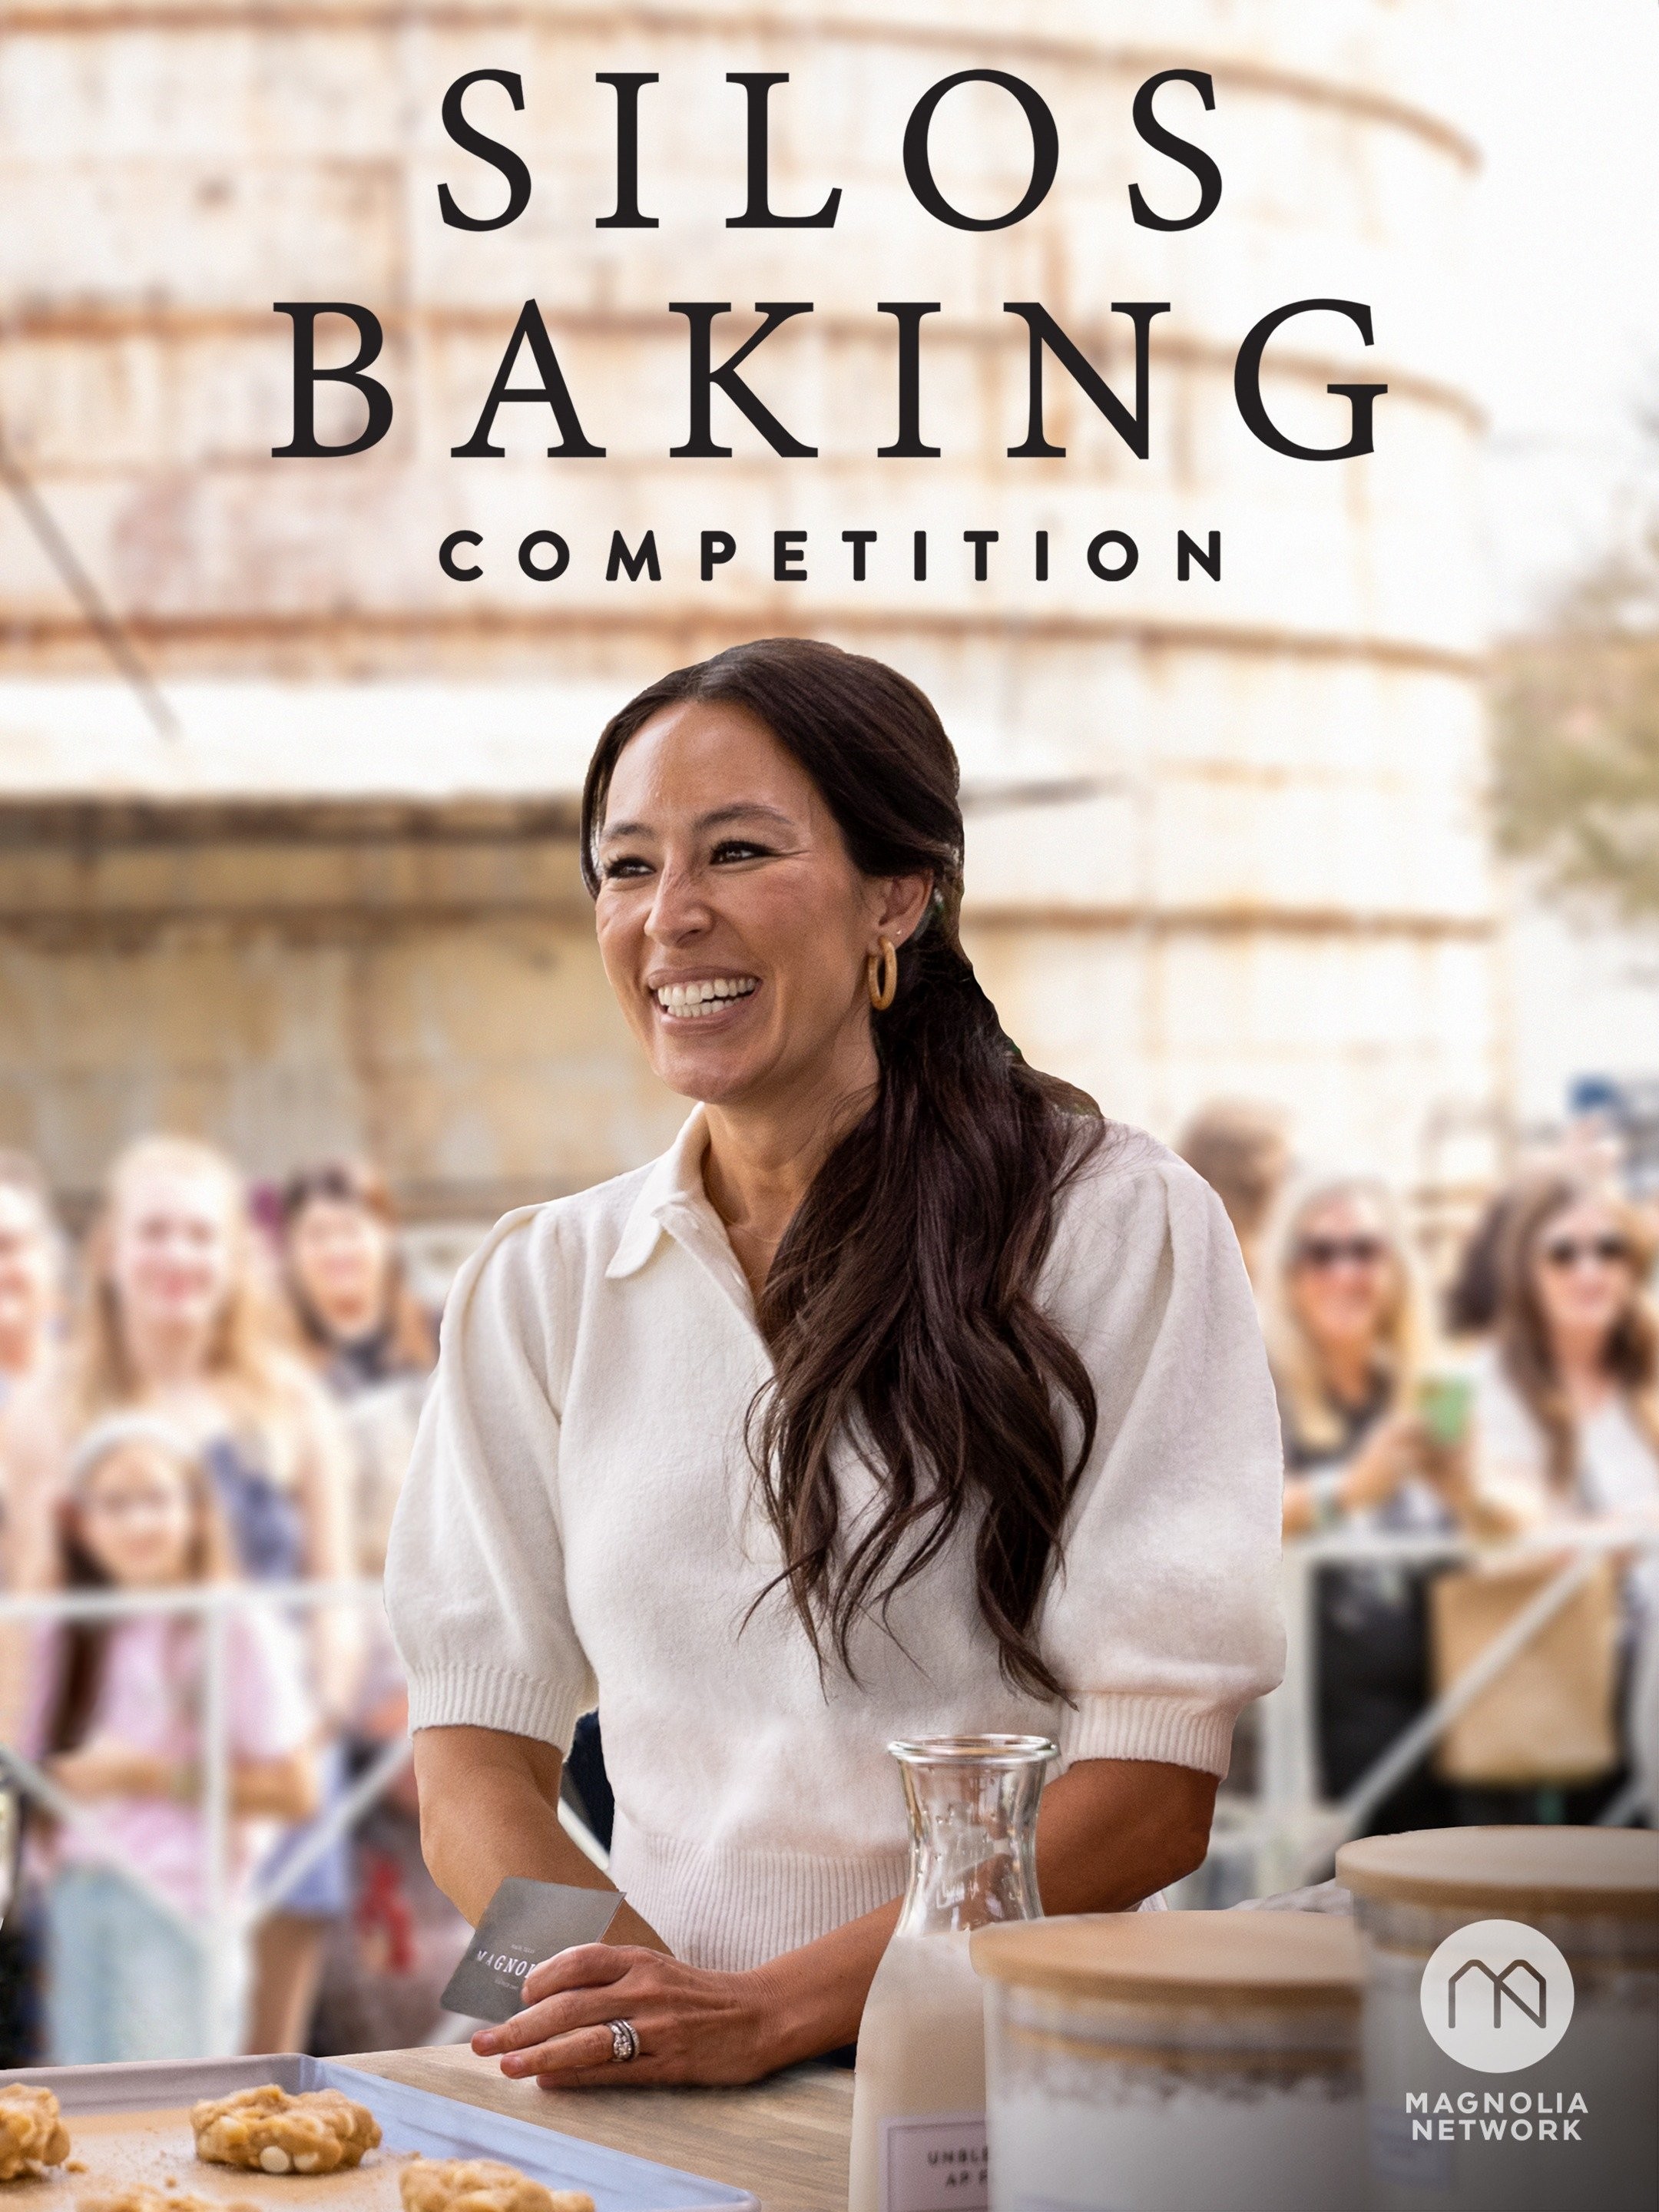 Silos Baking Co.  Baked goods developed by Joanna Gaines